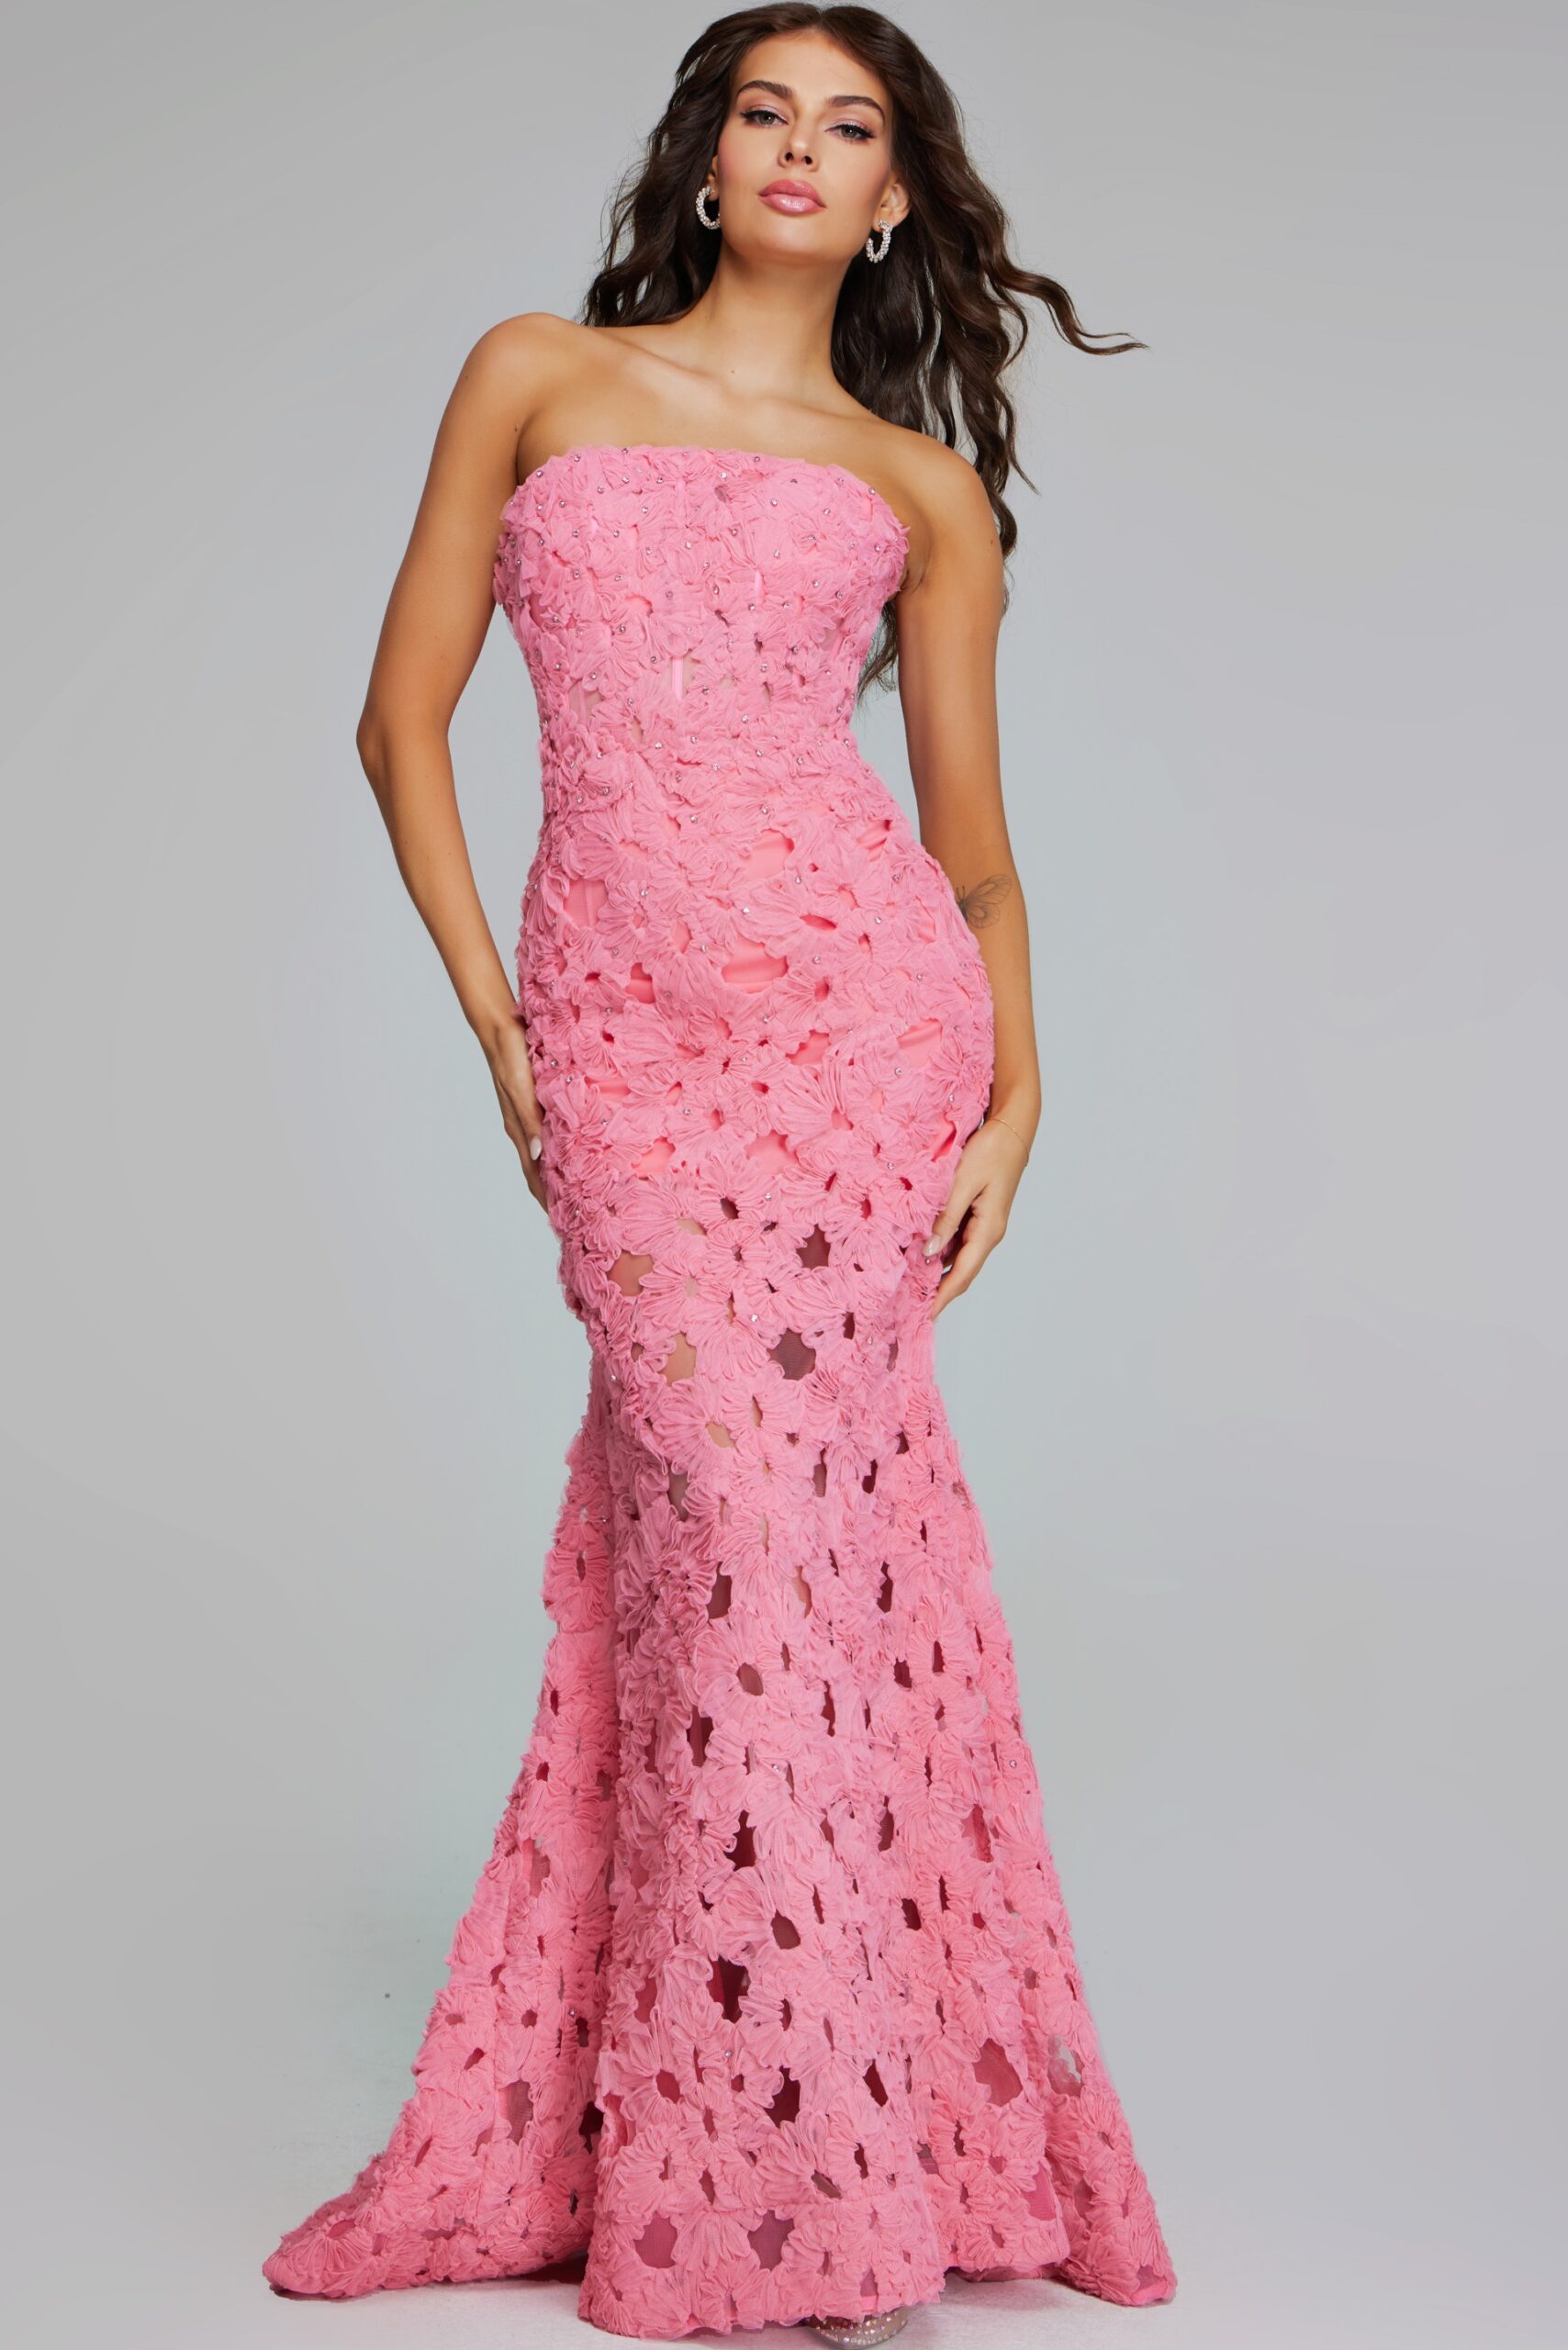 Pink Strapless Gown with Floral Lace Detailing 40744